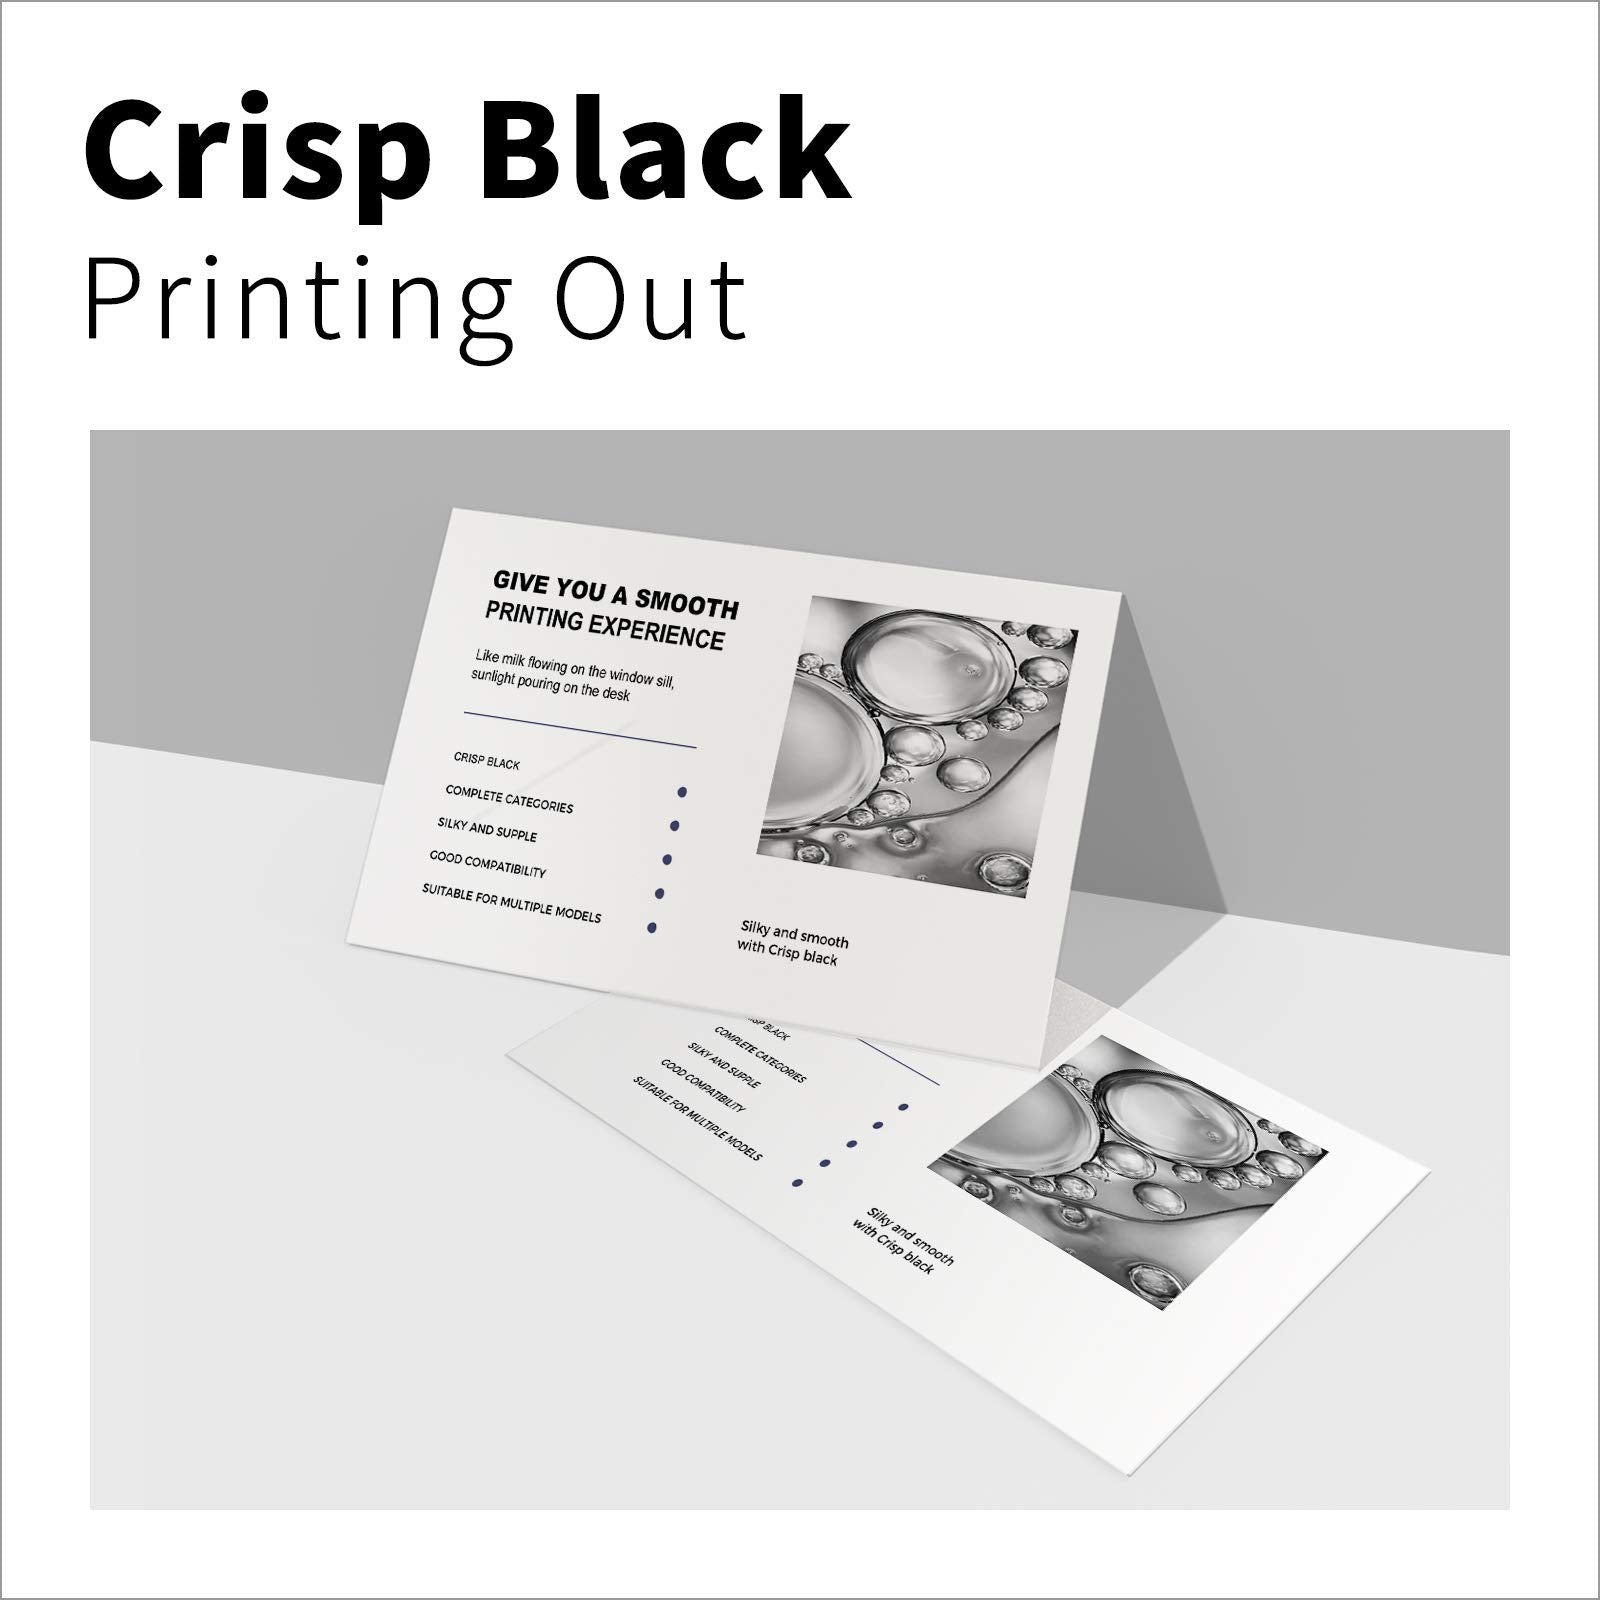 Sample printout demonstrating the crisp black quality of HP 67XL ink cartridges, ideal for producing clear text and detailed images.